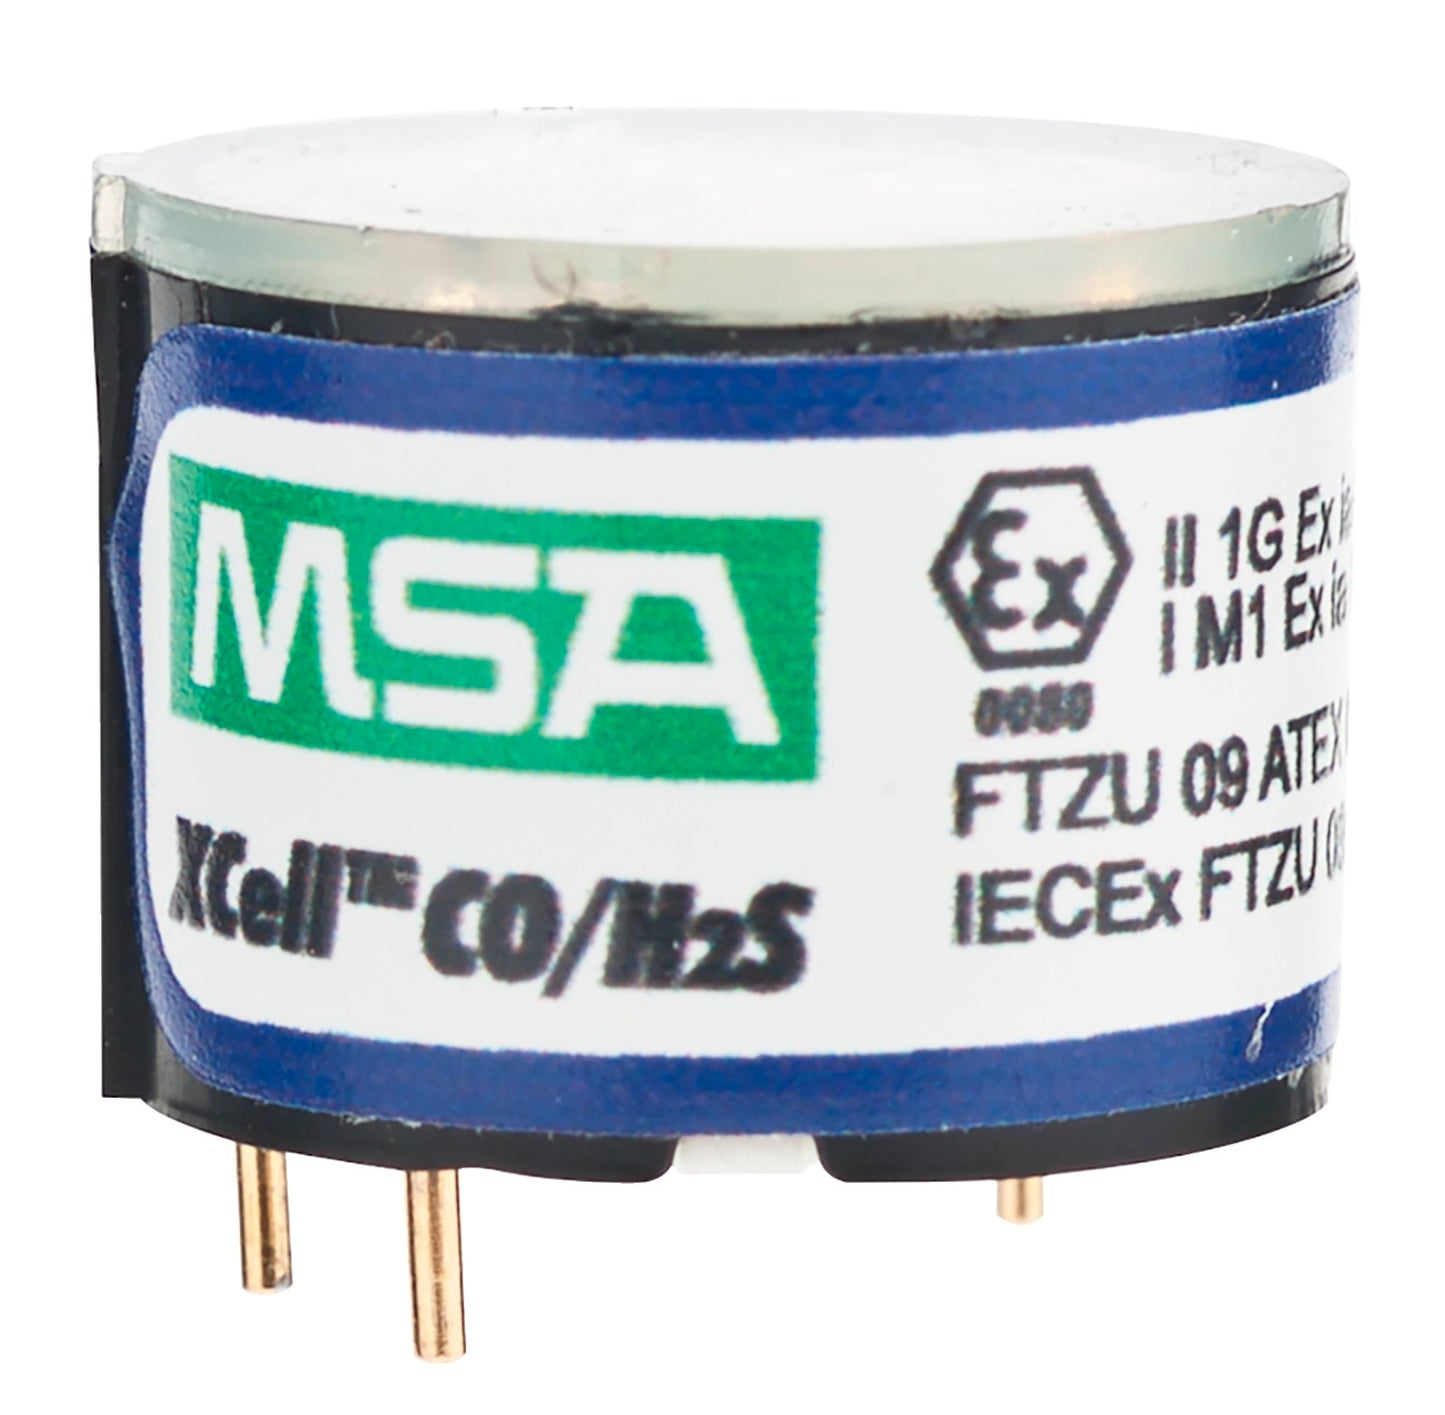 MSA Altair 5X Multigas Detector with Built-in Pump - LEL/O2/CO/H2S